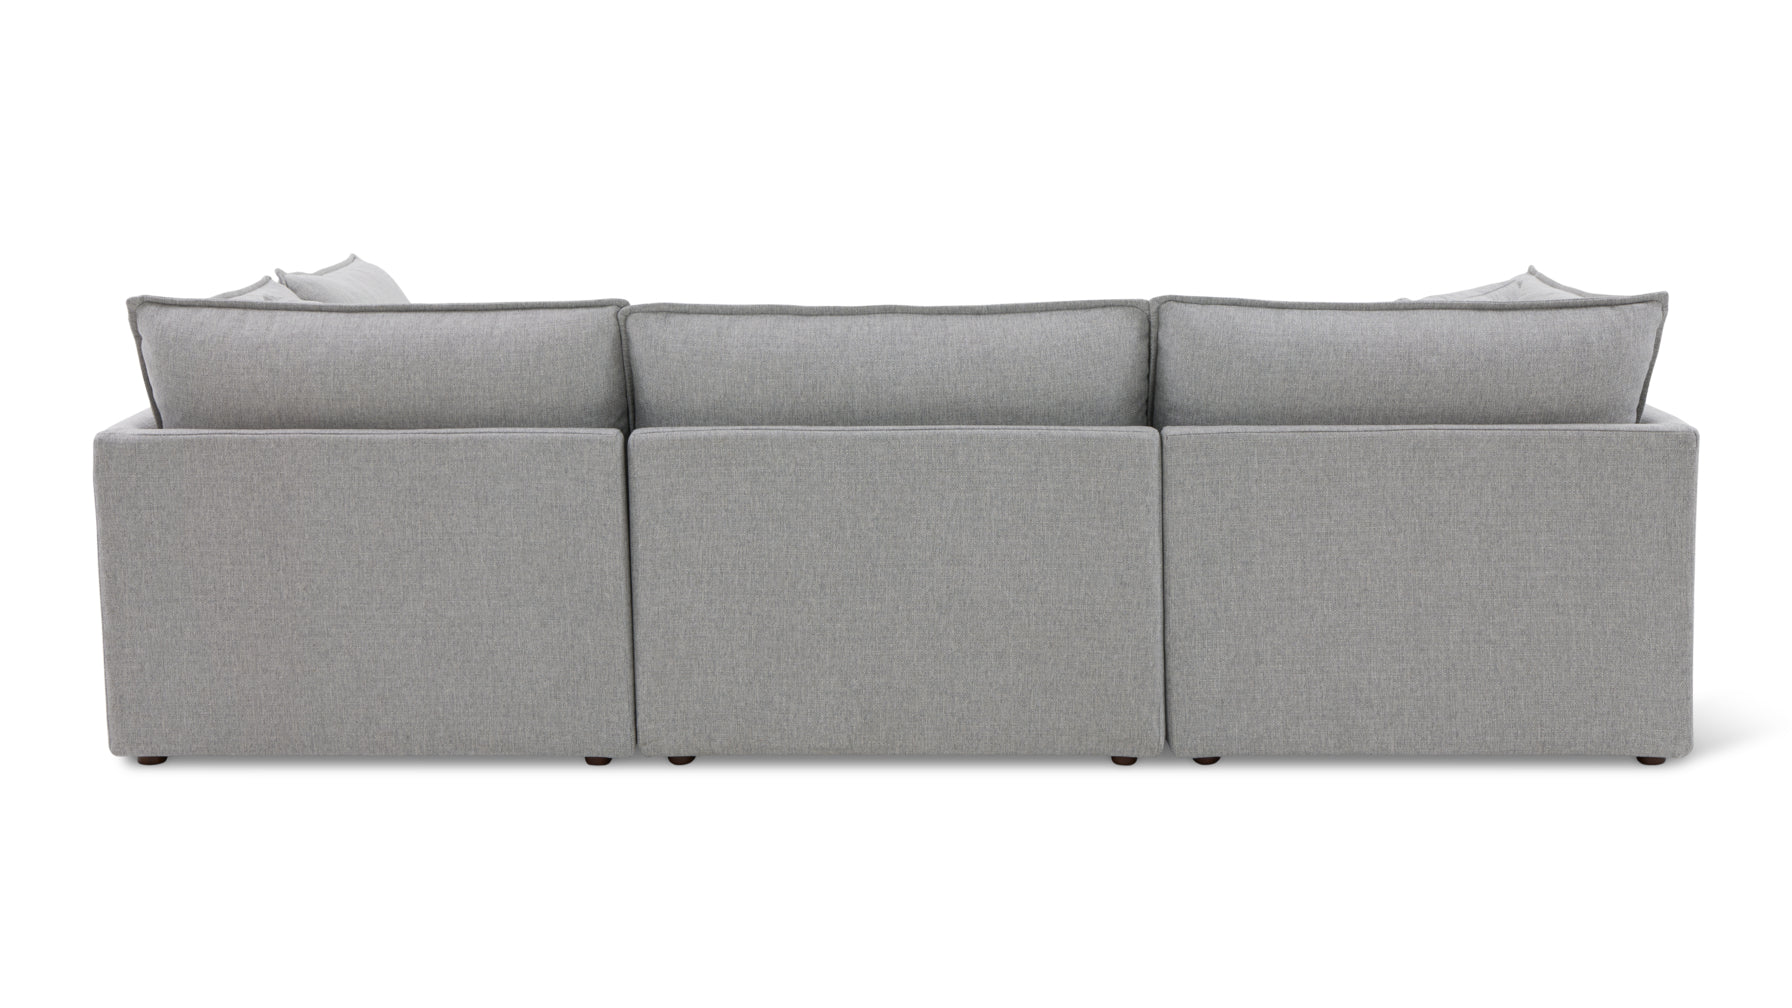 Chill Time 5-Piece Modular U-Shaped Sectional, Heather - Image 4